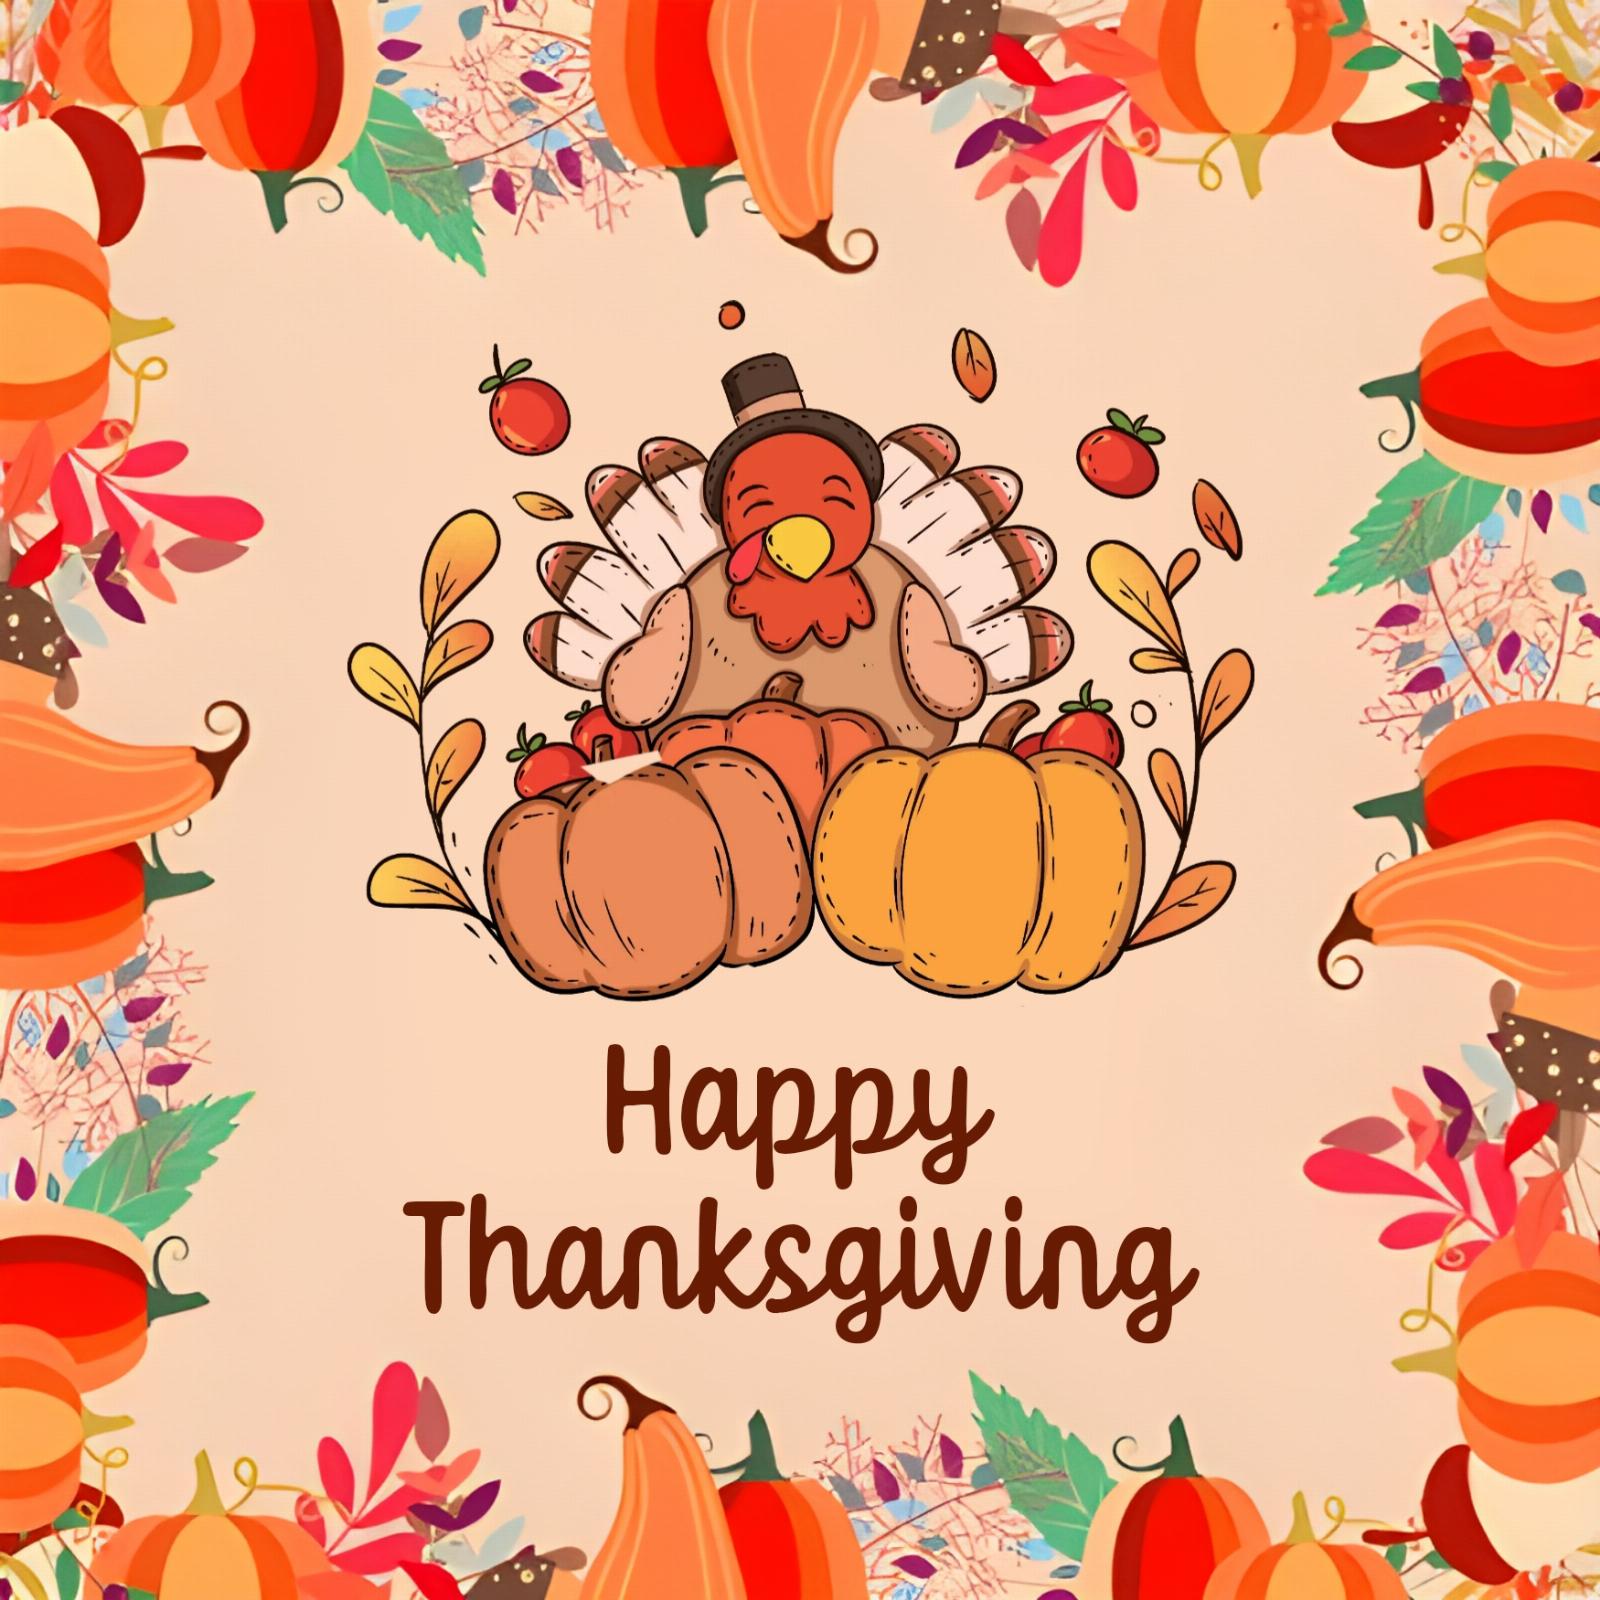 New Happy Thanksgiving Images 2022 HD Download